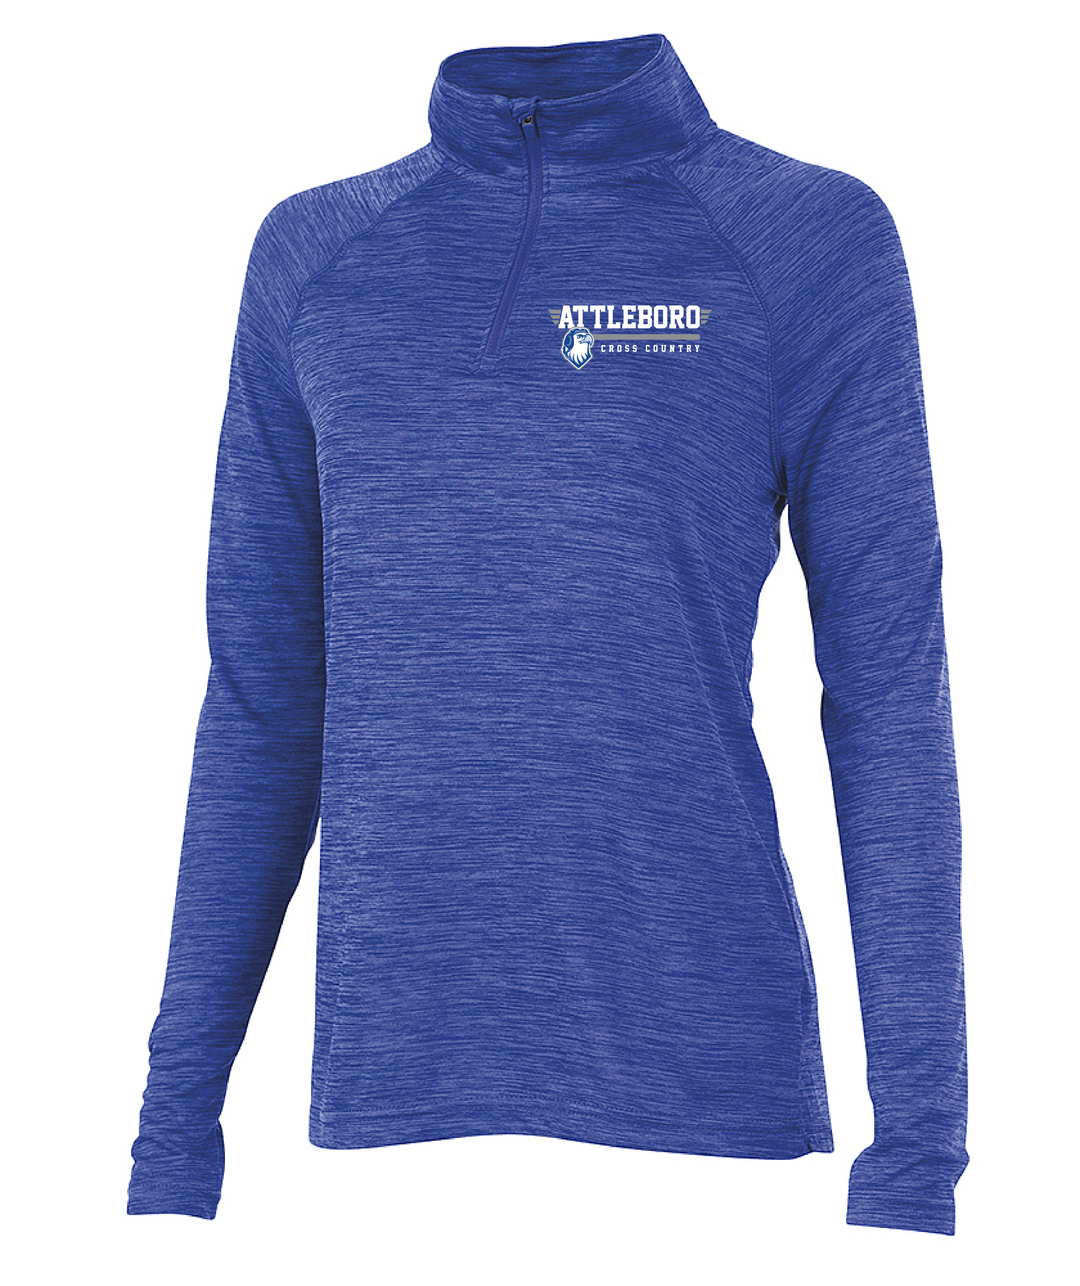 Attleboro Cross Country Womens Space Dye Performance Pullover (5763)